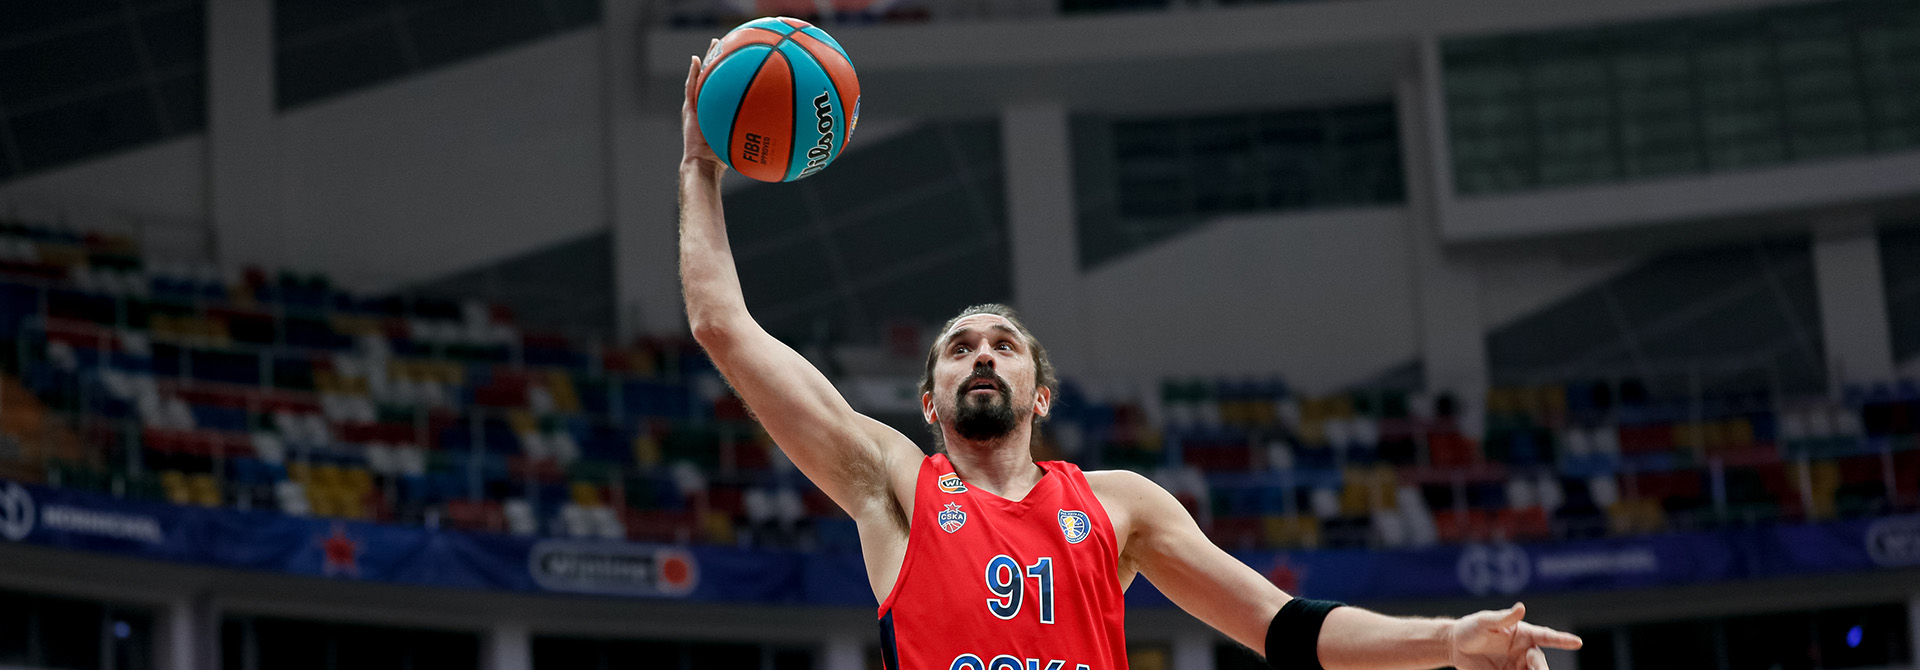 We wish Alexey Shved soonest recovery!